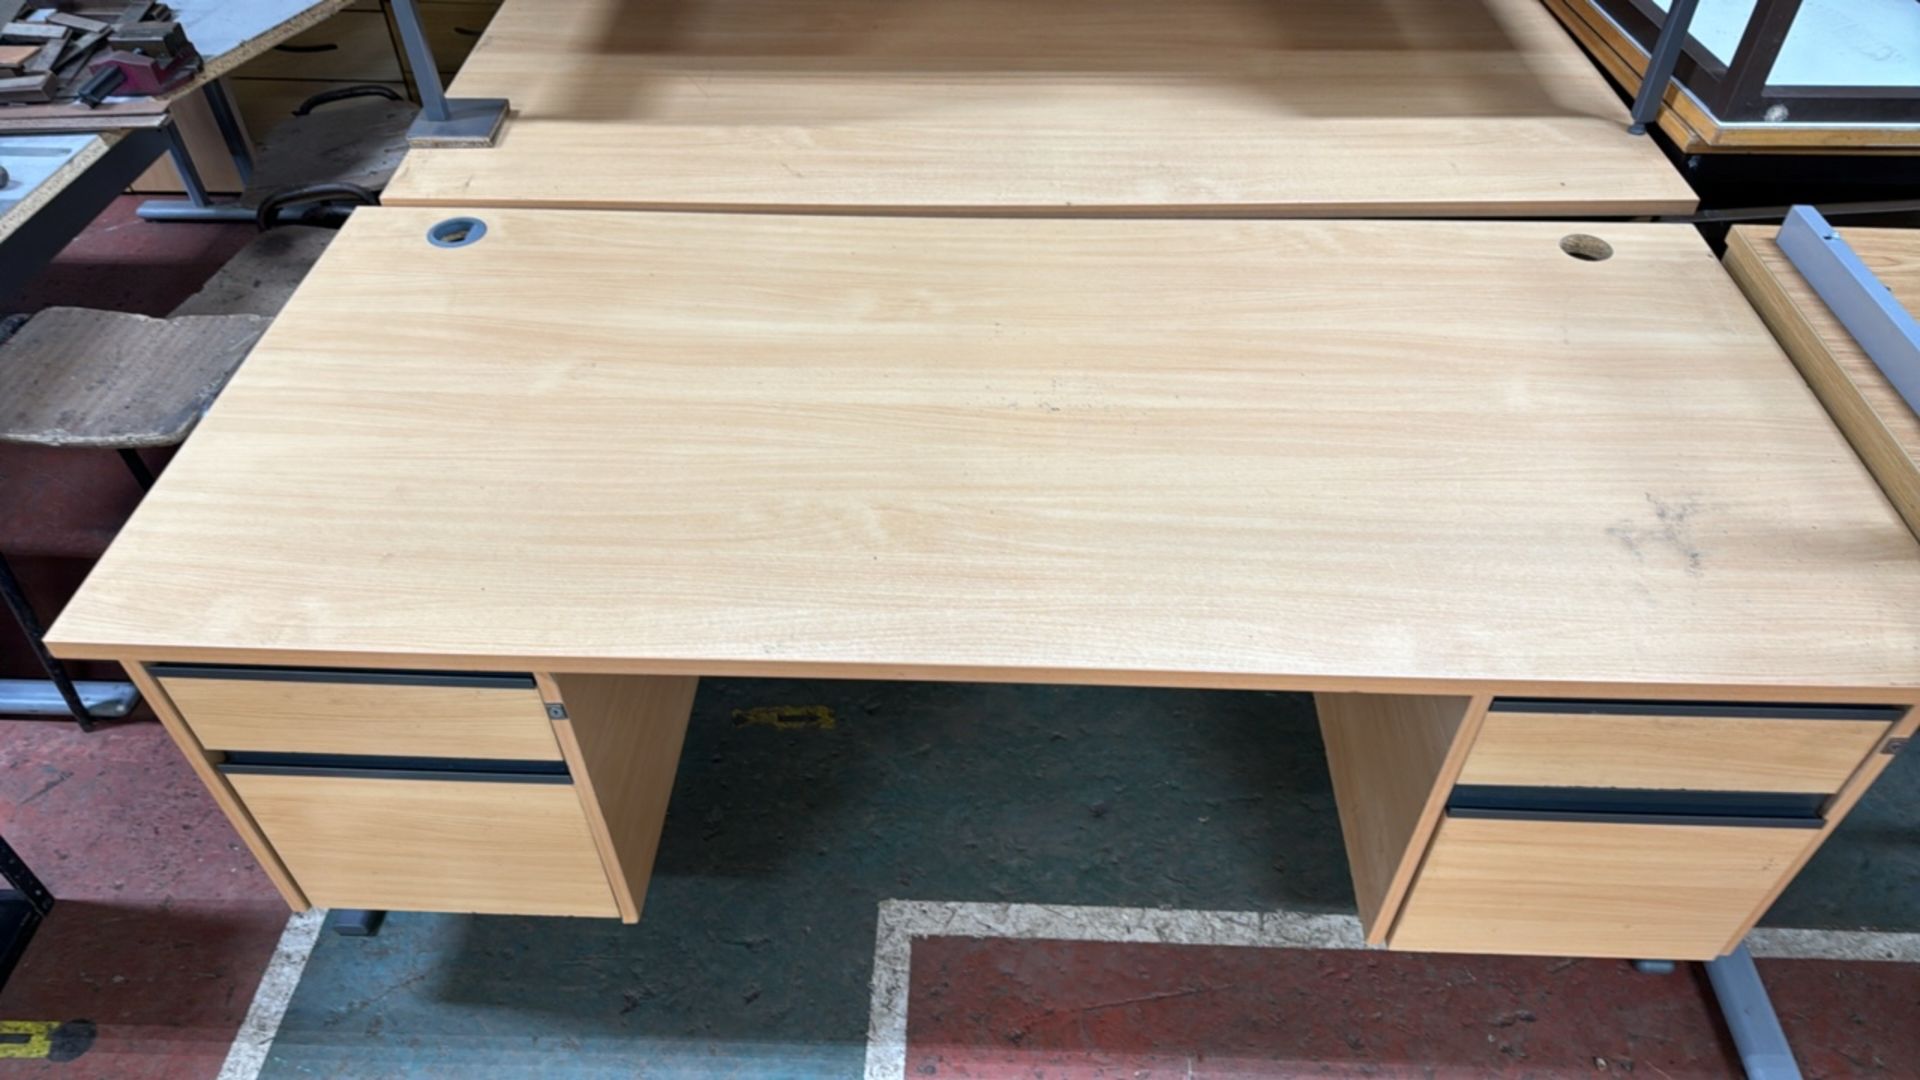 Pine Effect Office Desk With Storage Drawers - Image 3 of 7